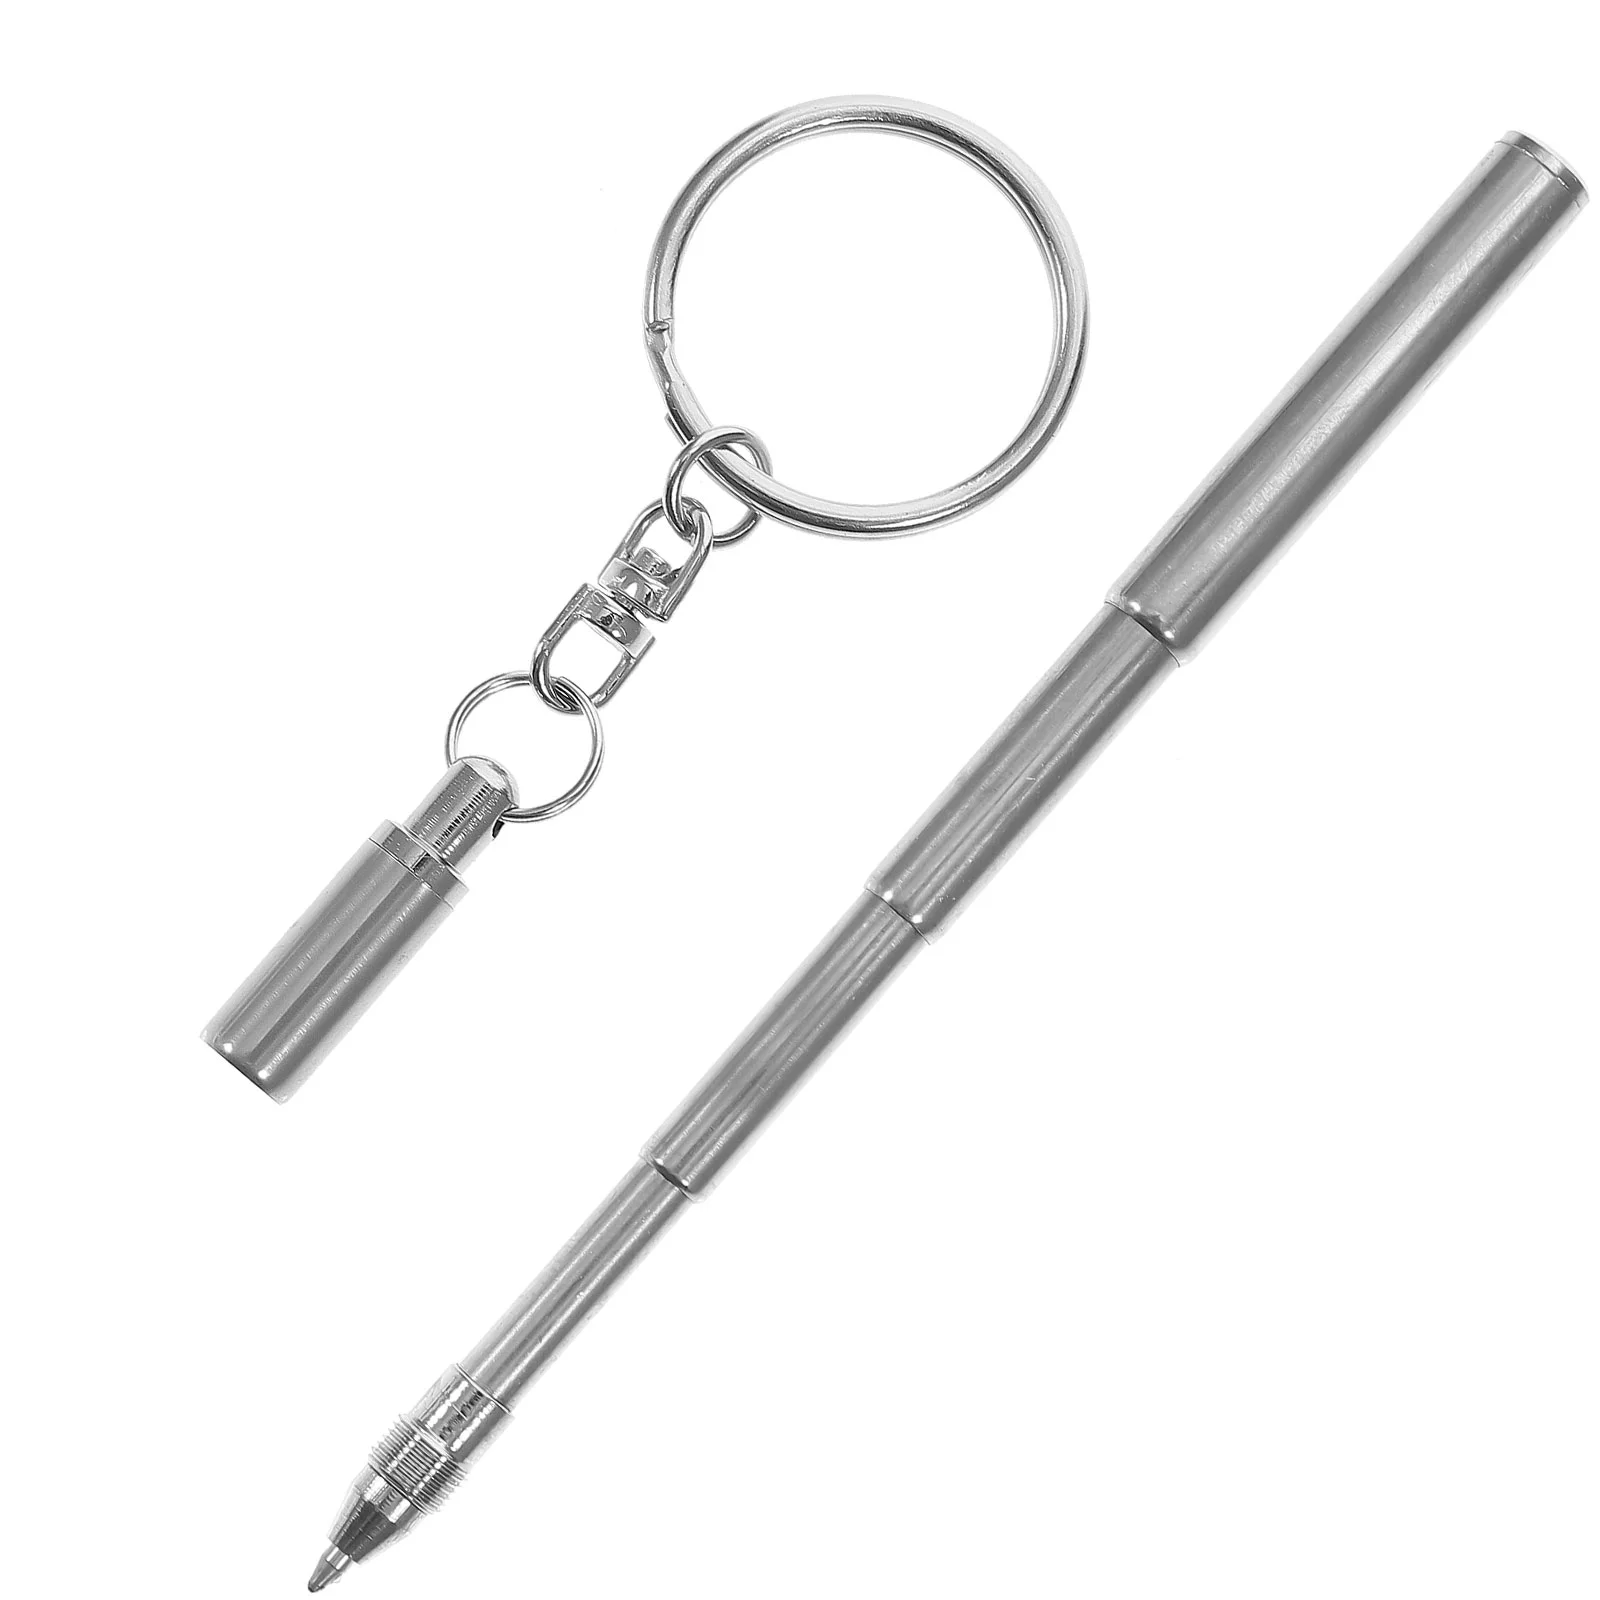 Retractable Pen Shape Keychain Mini Metal Key Ring Portable Stainless Steel Telescopic The Tools Keychain Tools ring box square portable wood vintage design earring box for wedding jewelry organizer ring gift case